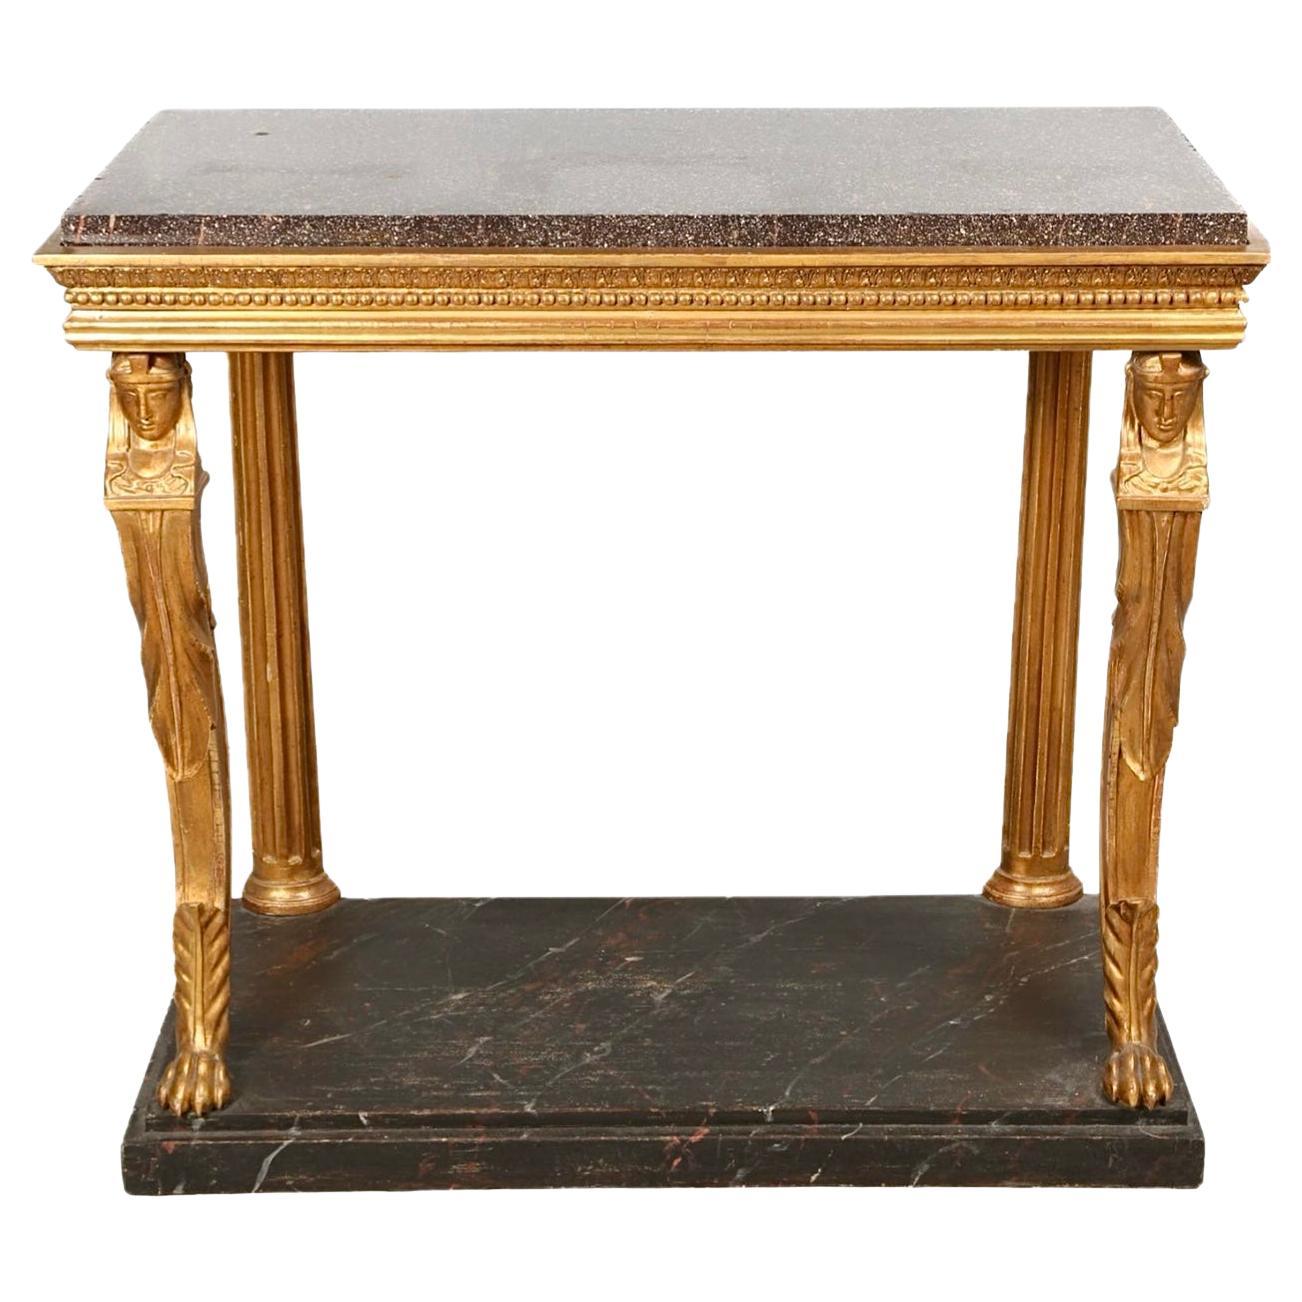 Swedish Neoclassical Giltwood Porphyry Top Console Table, Early 19th Century For Sale